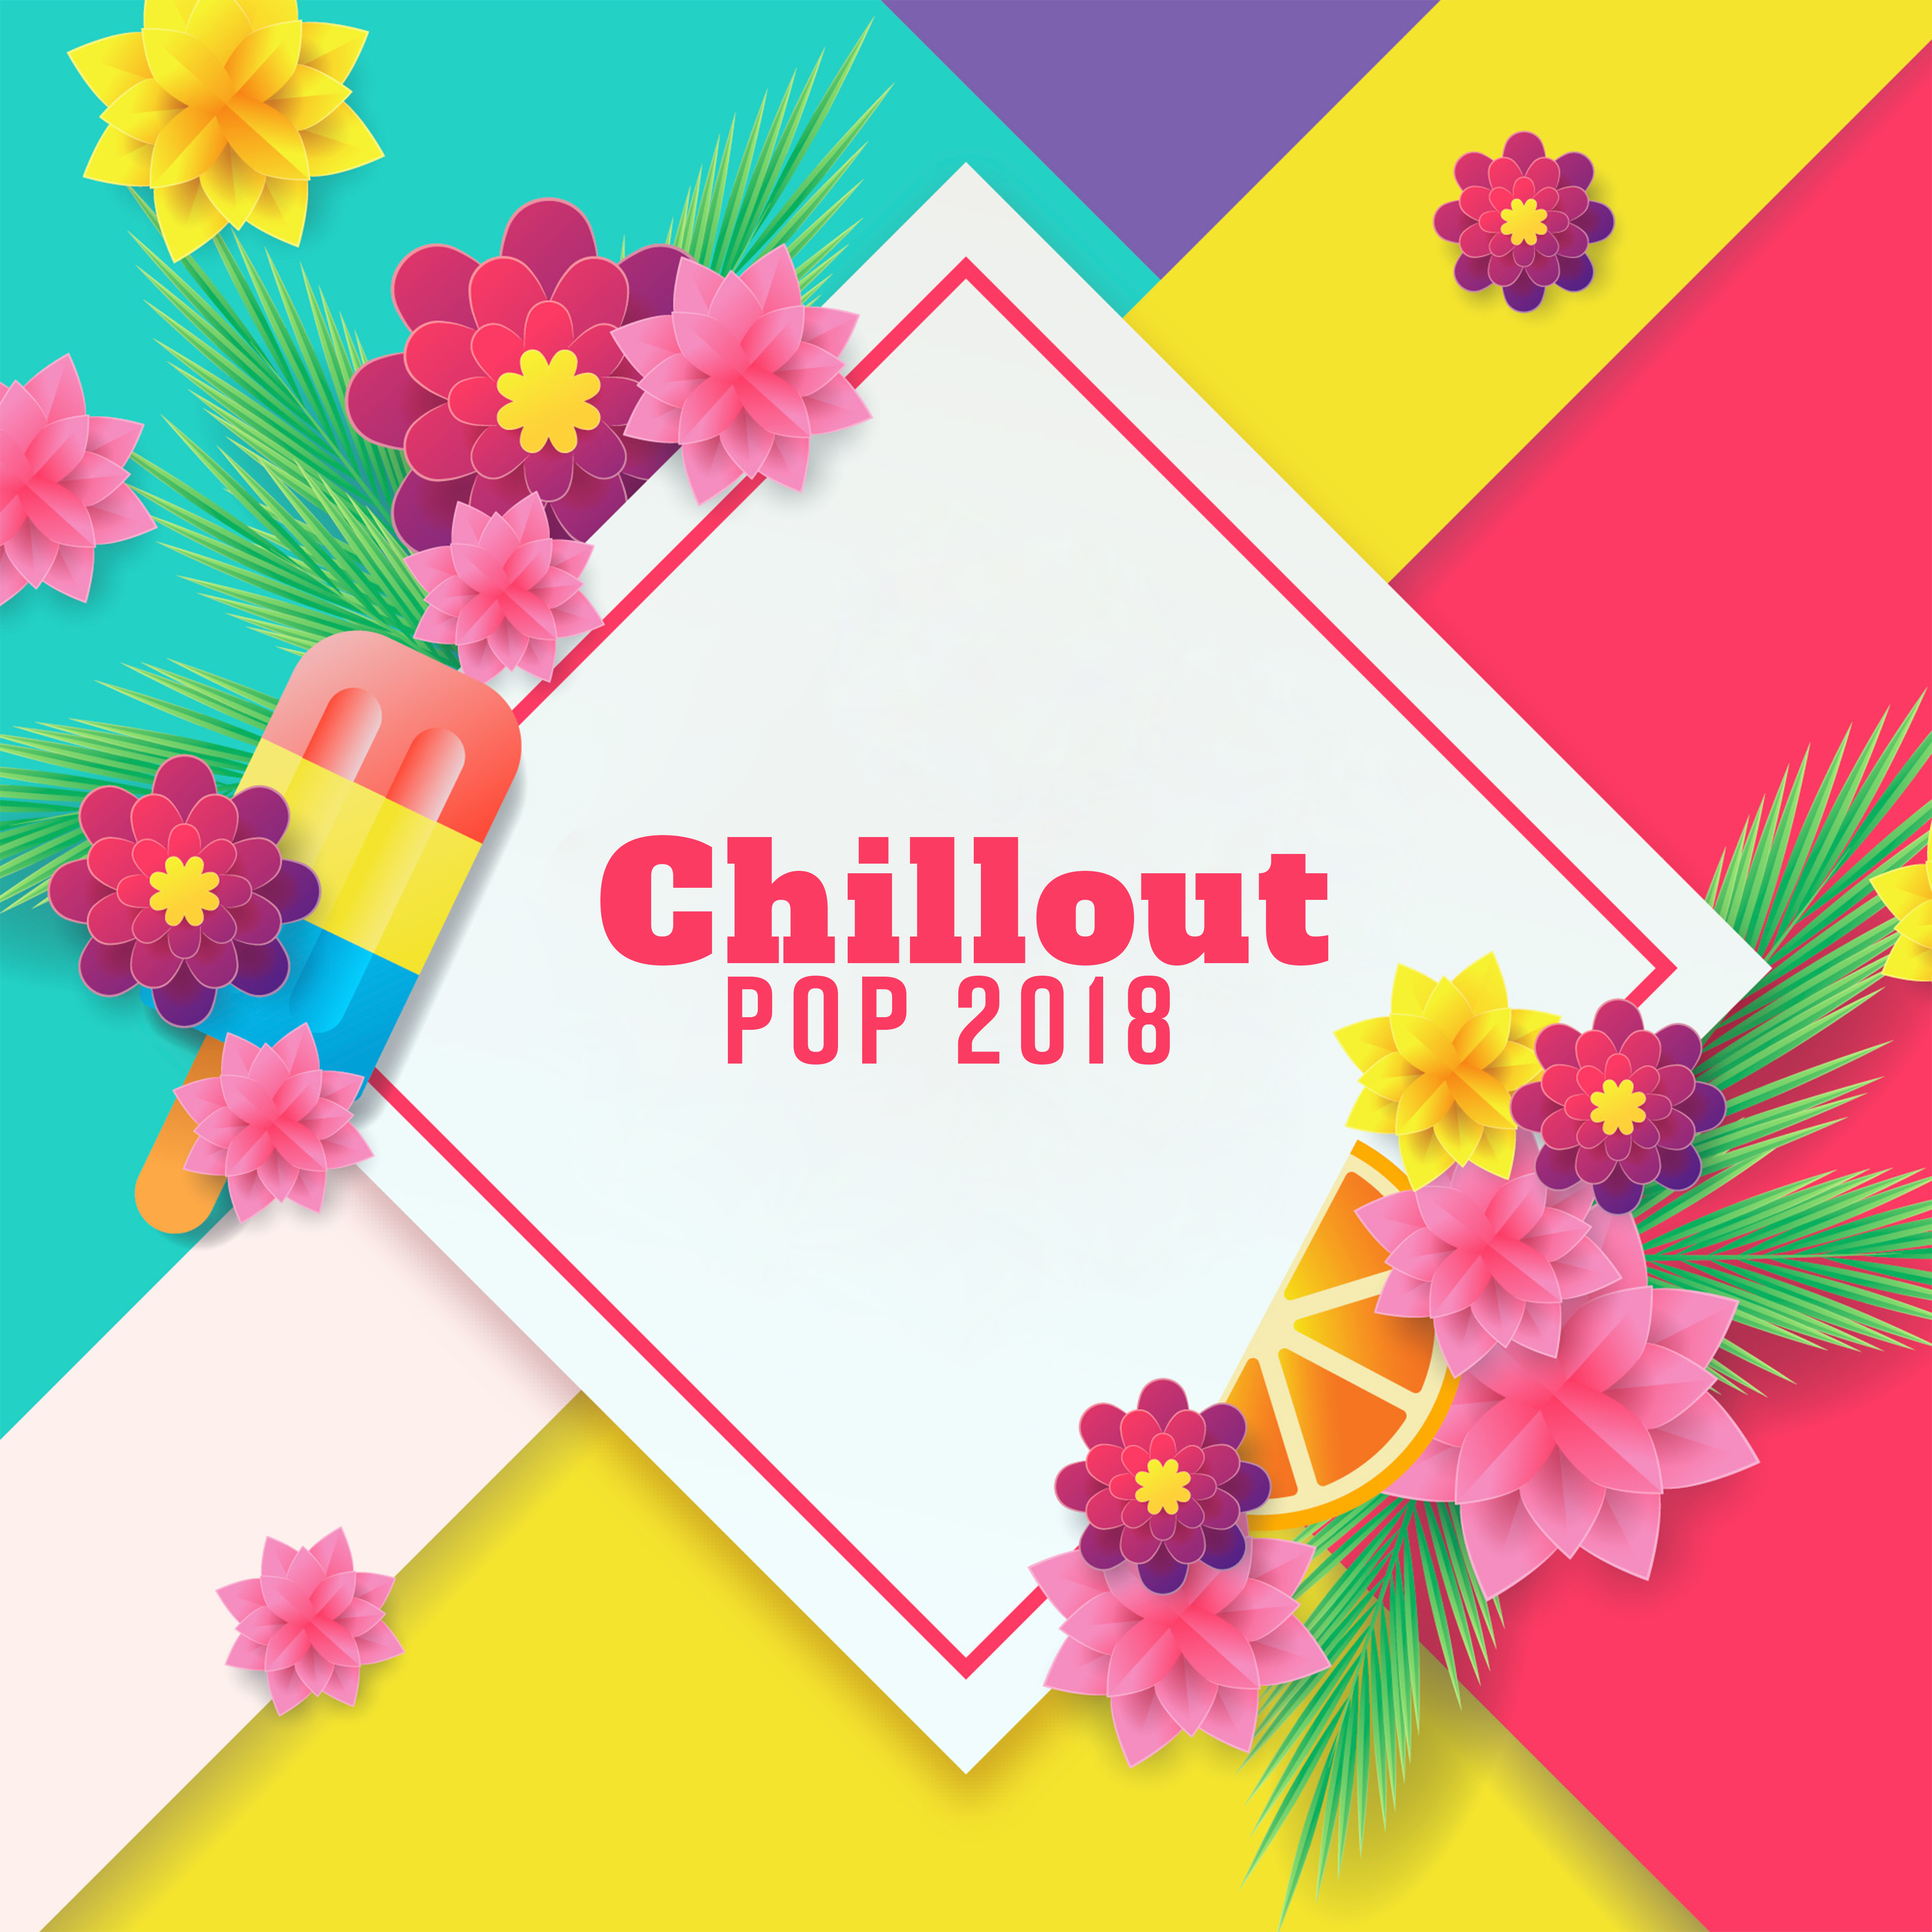 Chillout POP 2018